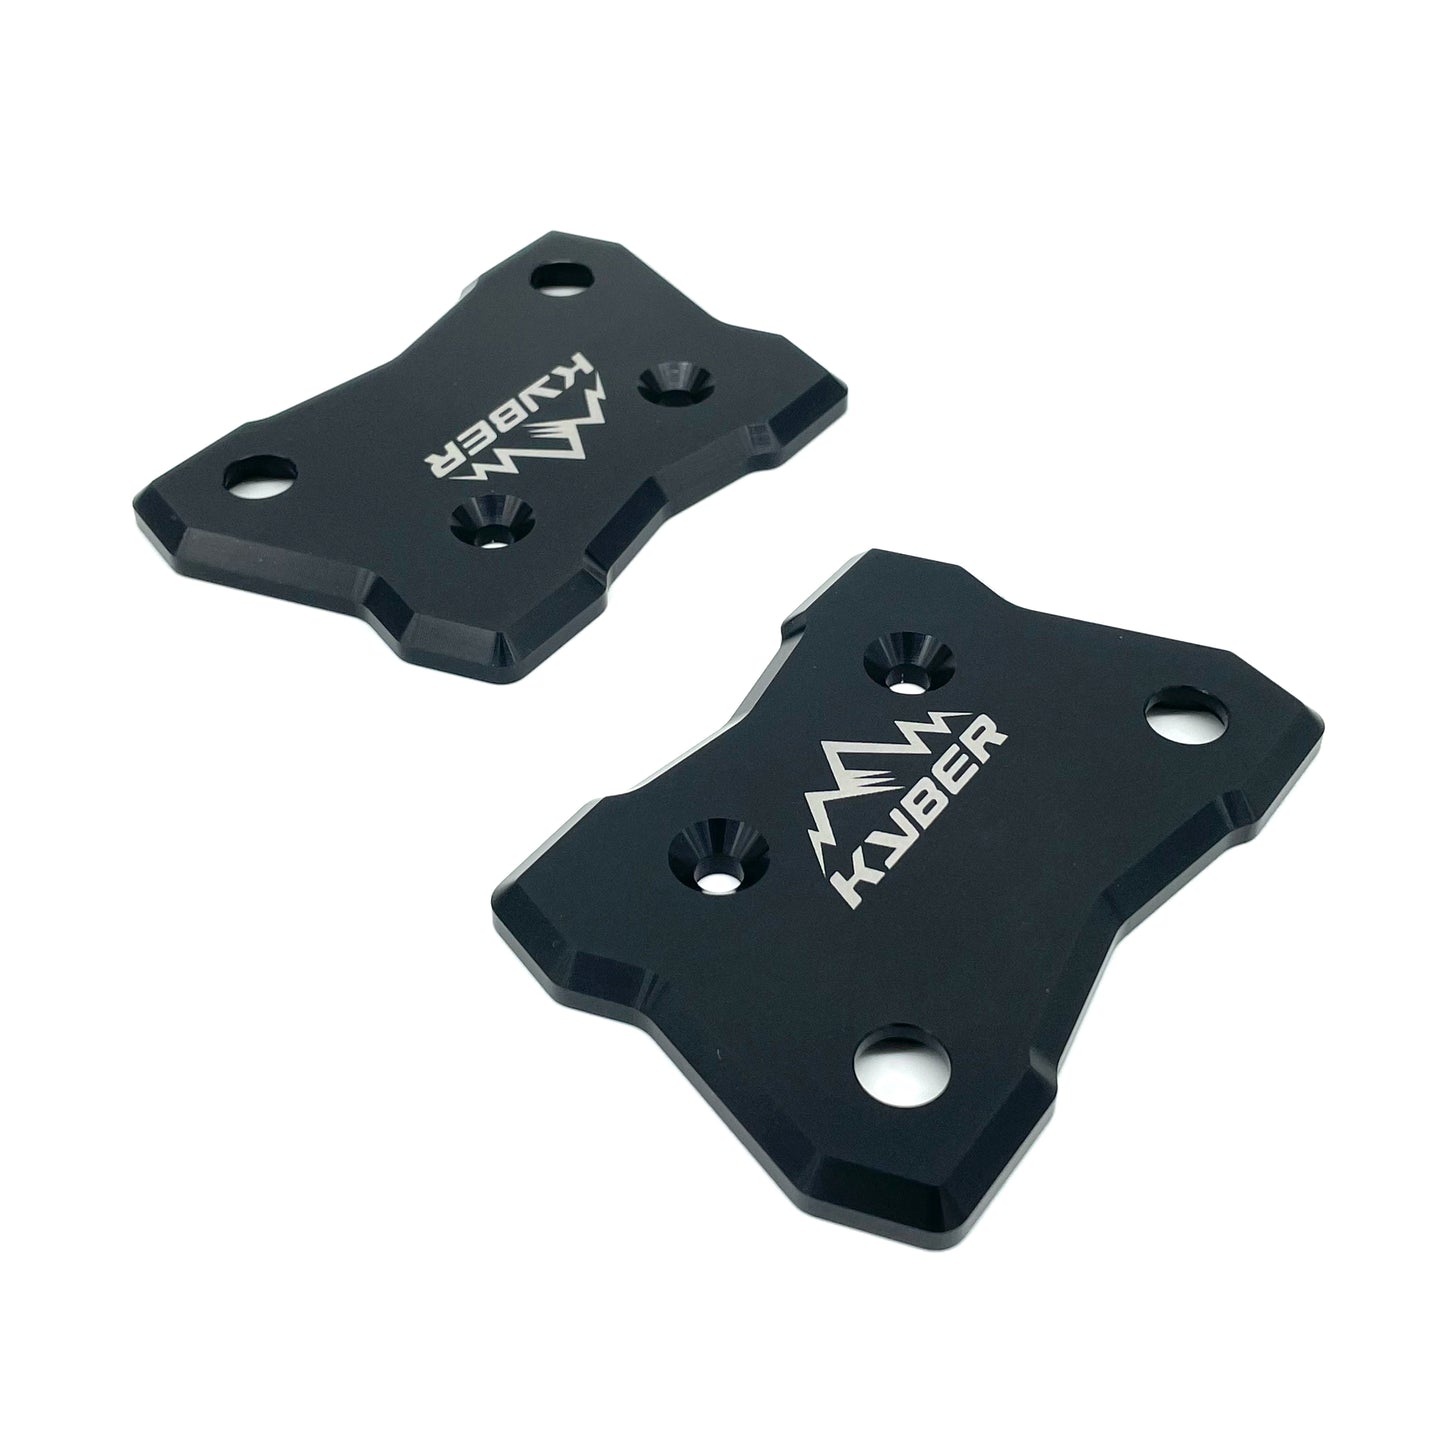 LinQ Mount - Adapter Plates